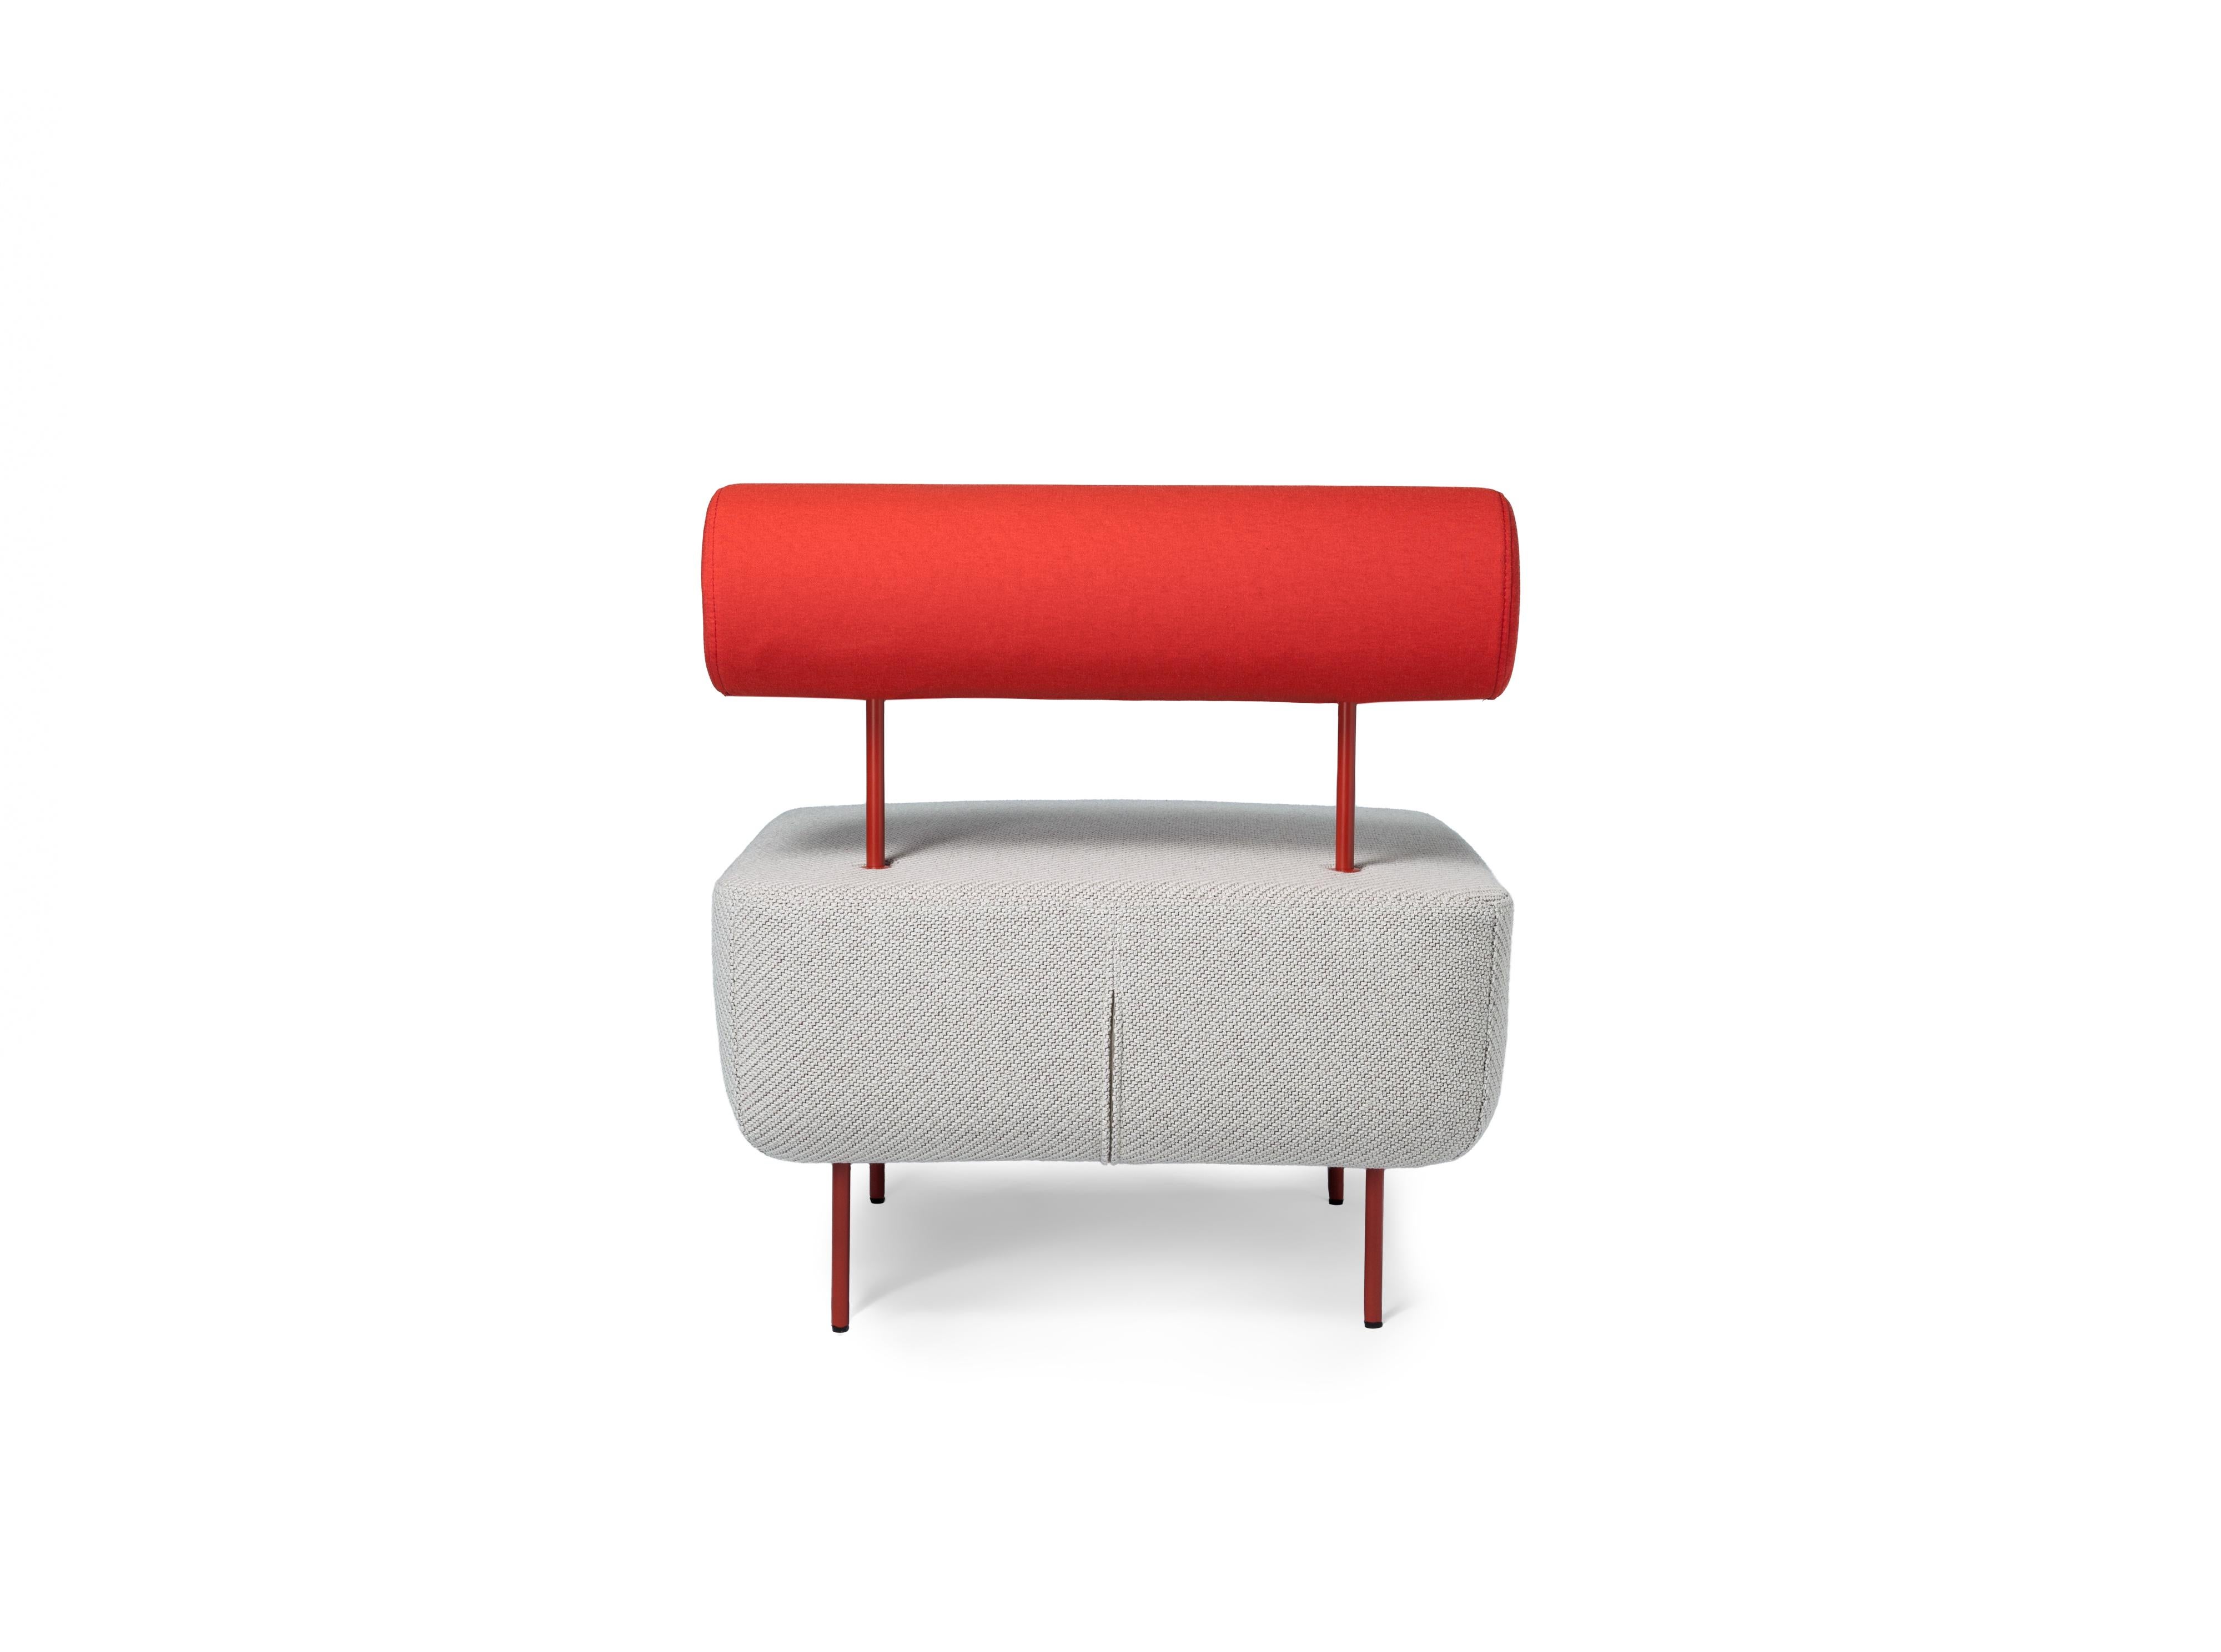 European Petite Friture Medium Hoff Armchair in White and Red by Morten & Jonas, 2015 For Sale